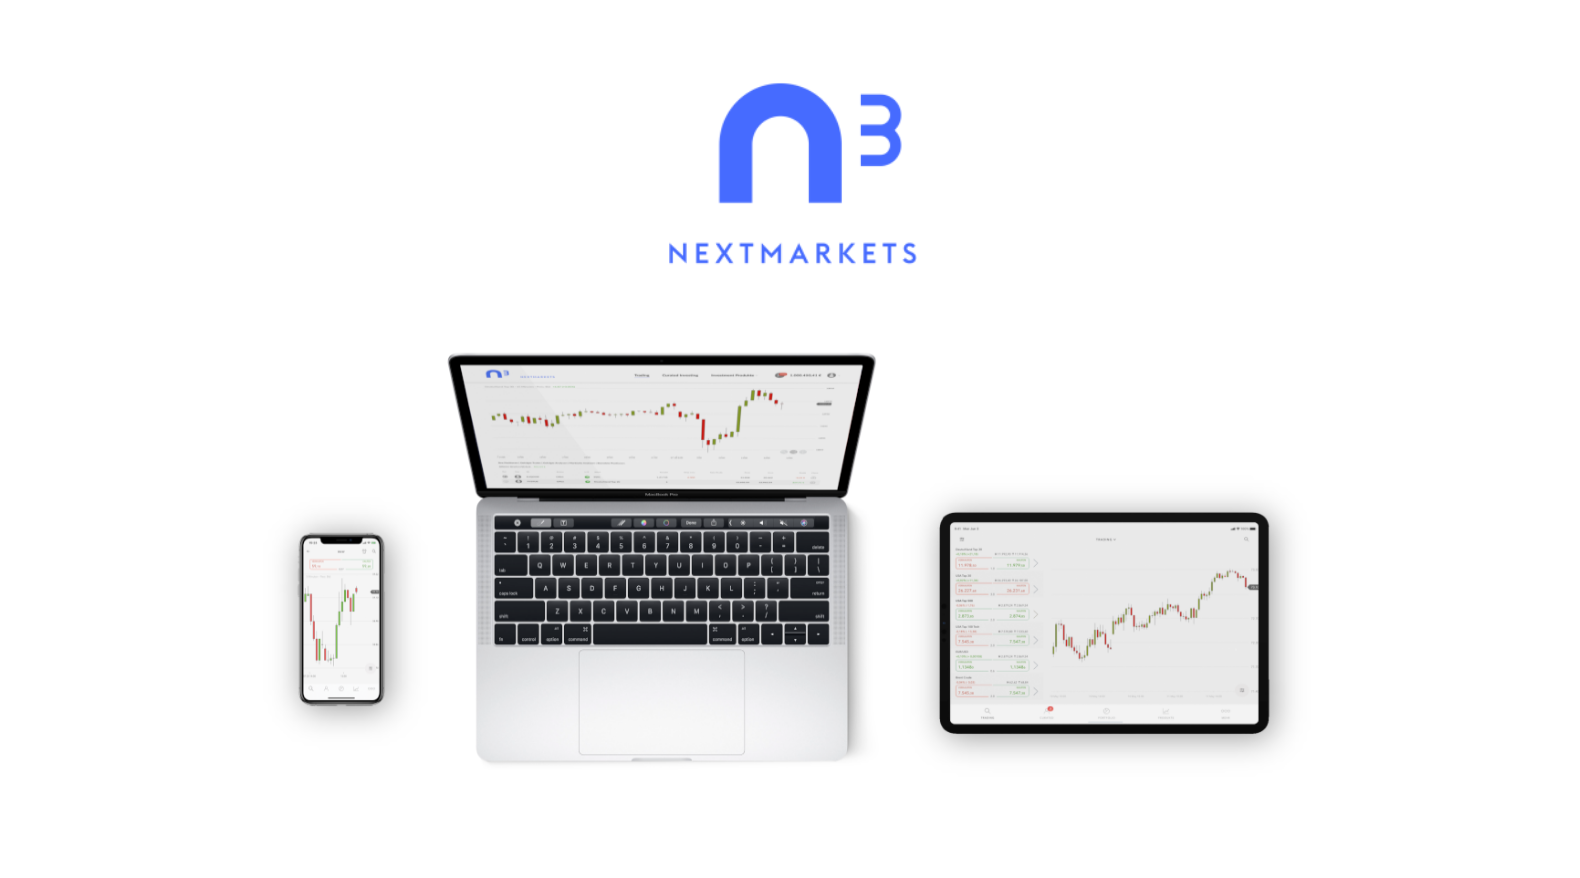 When a-quant partners up with nextmarket